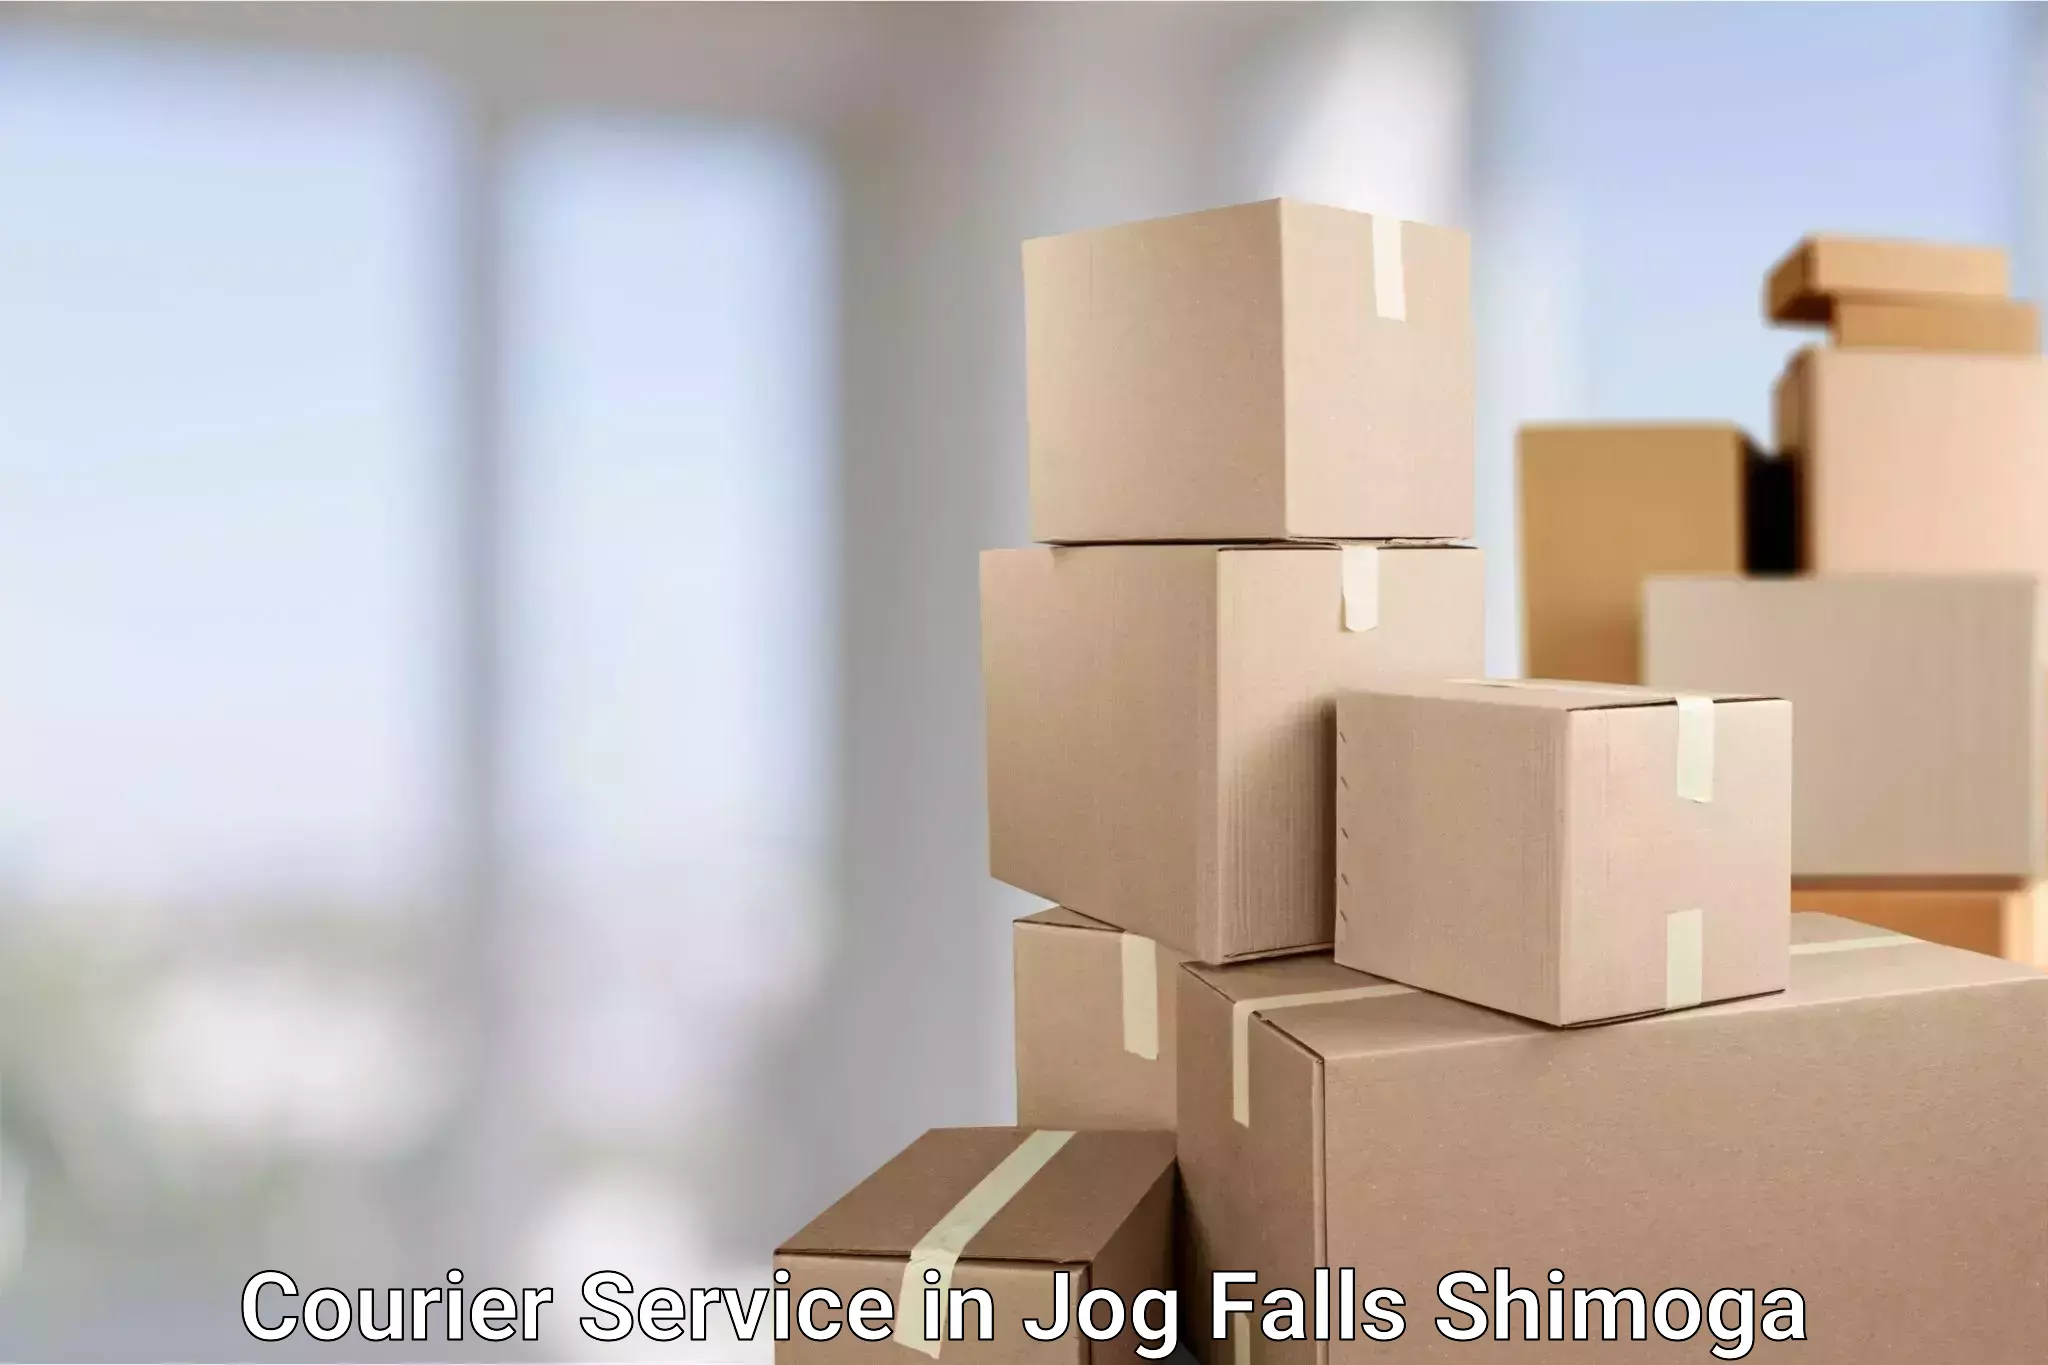 On-time delivery services in Jog Falls Shimoga